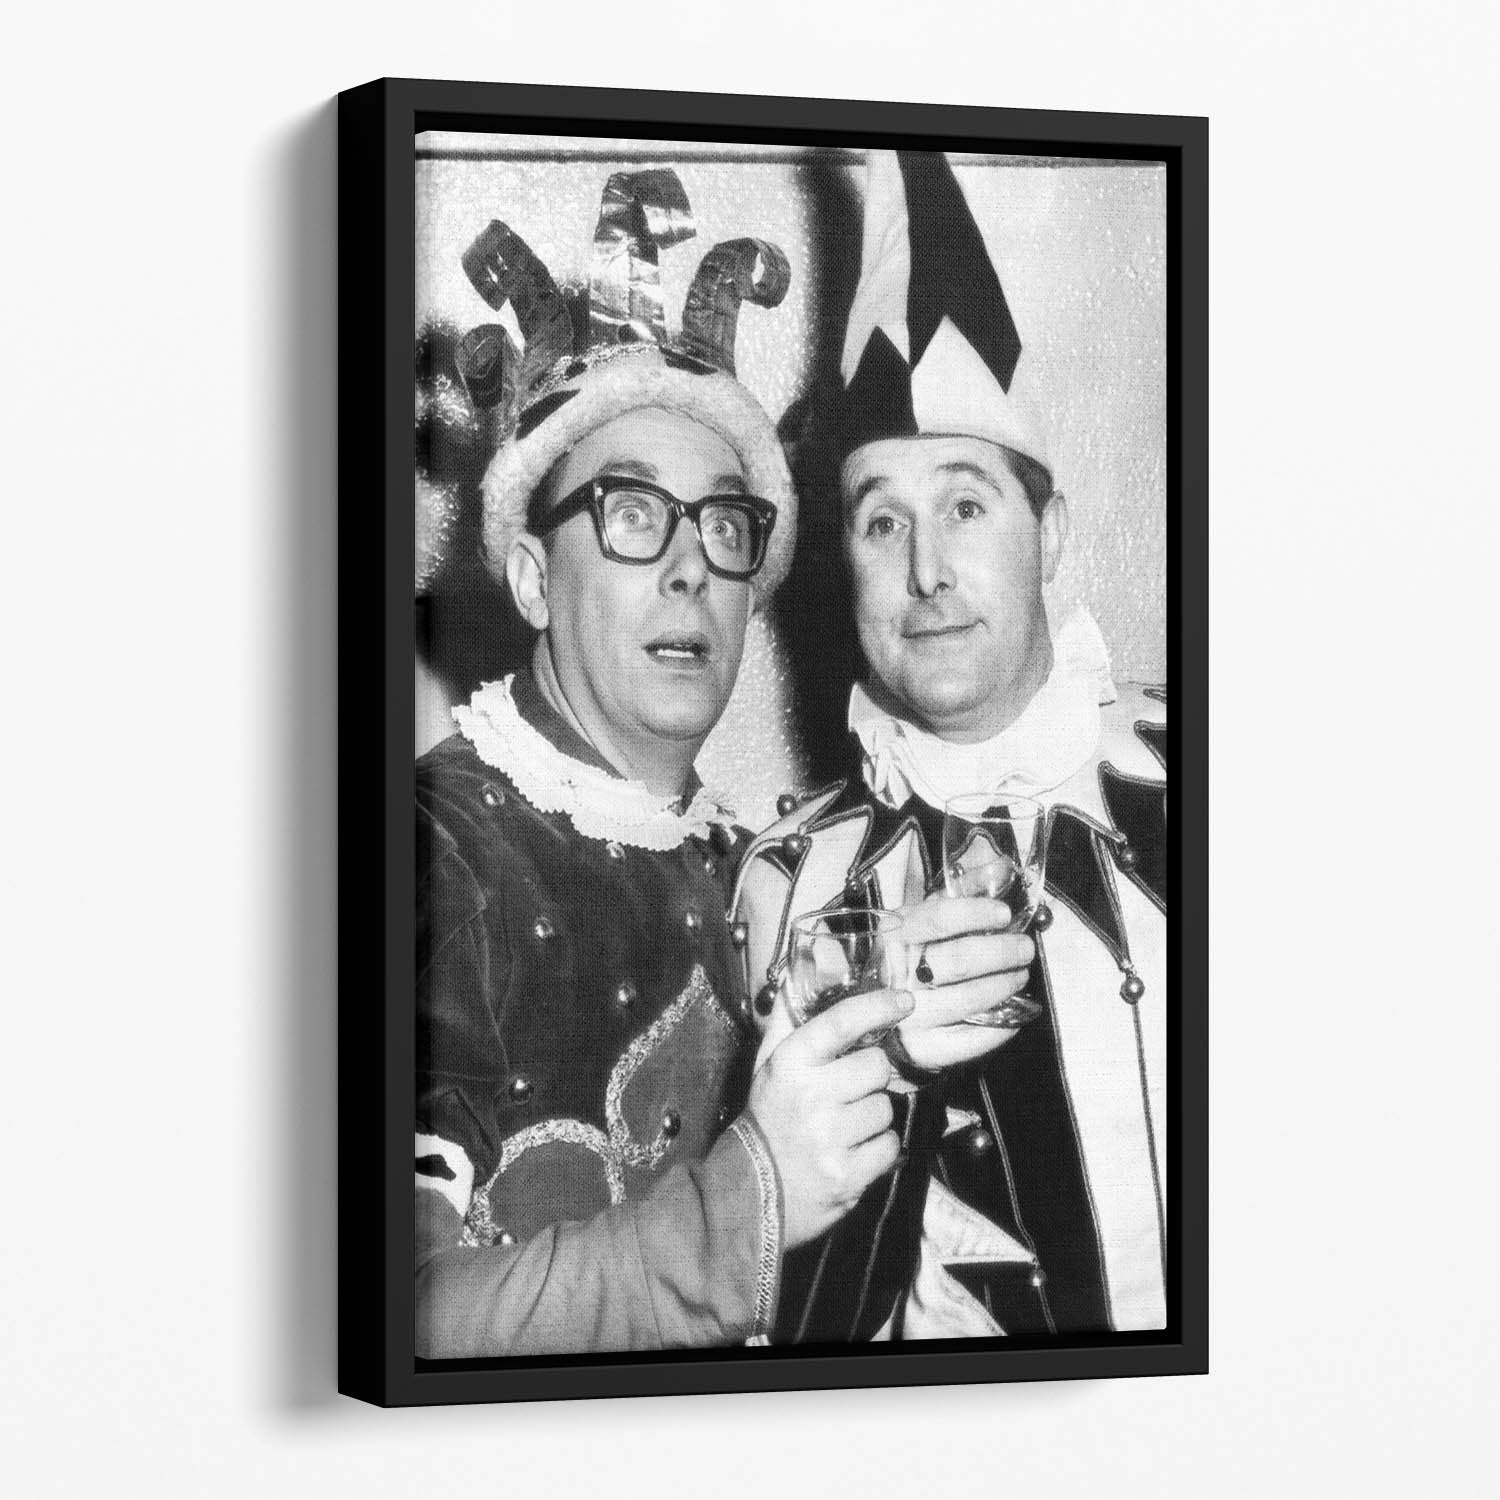 Morecambe and Wise dressed as court jesters Floating Framed Canvas